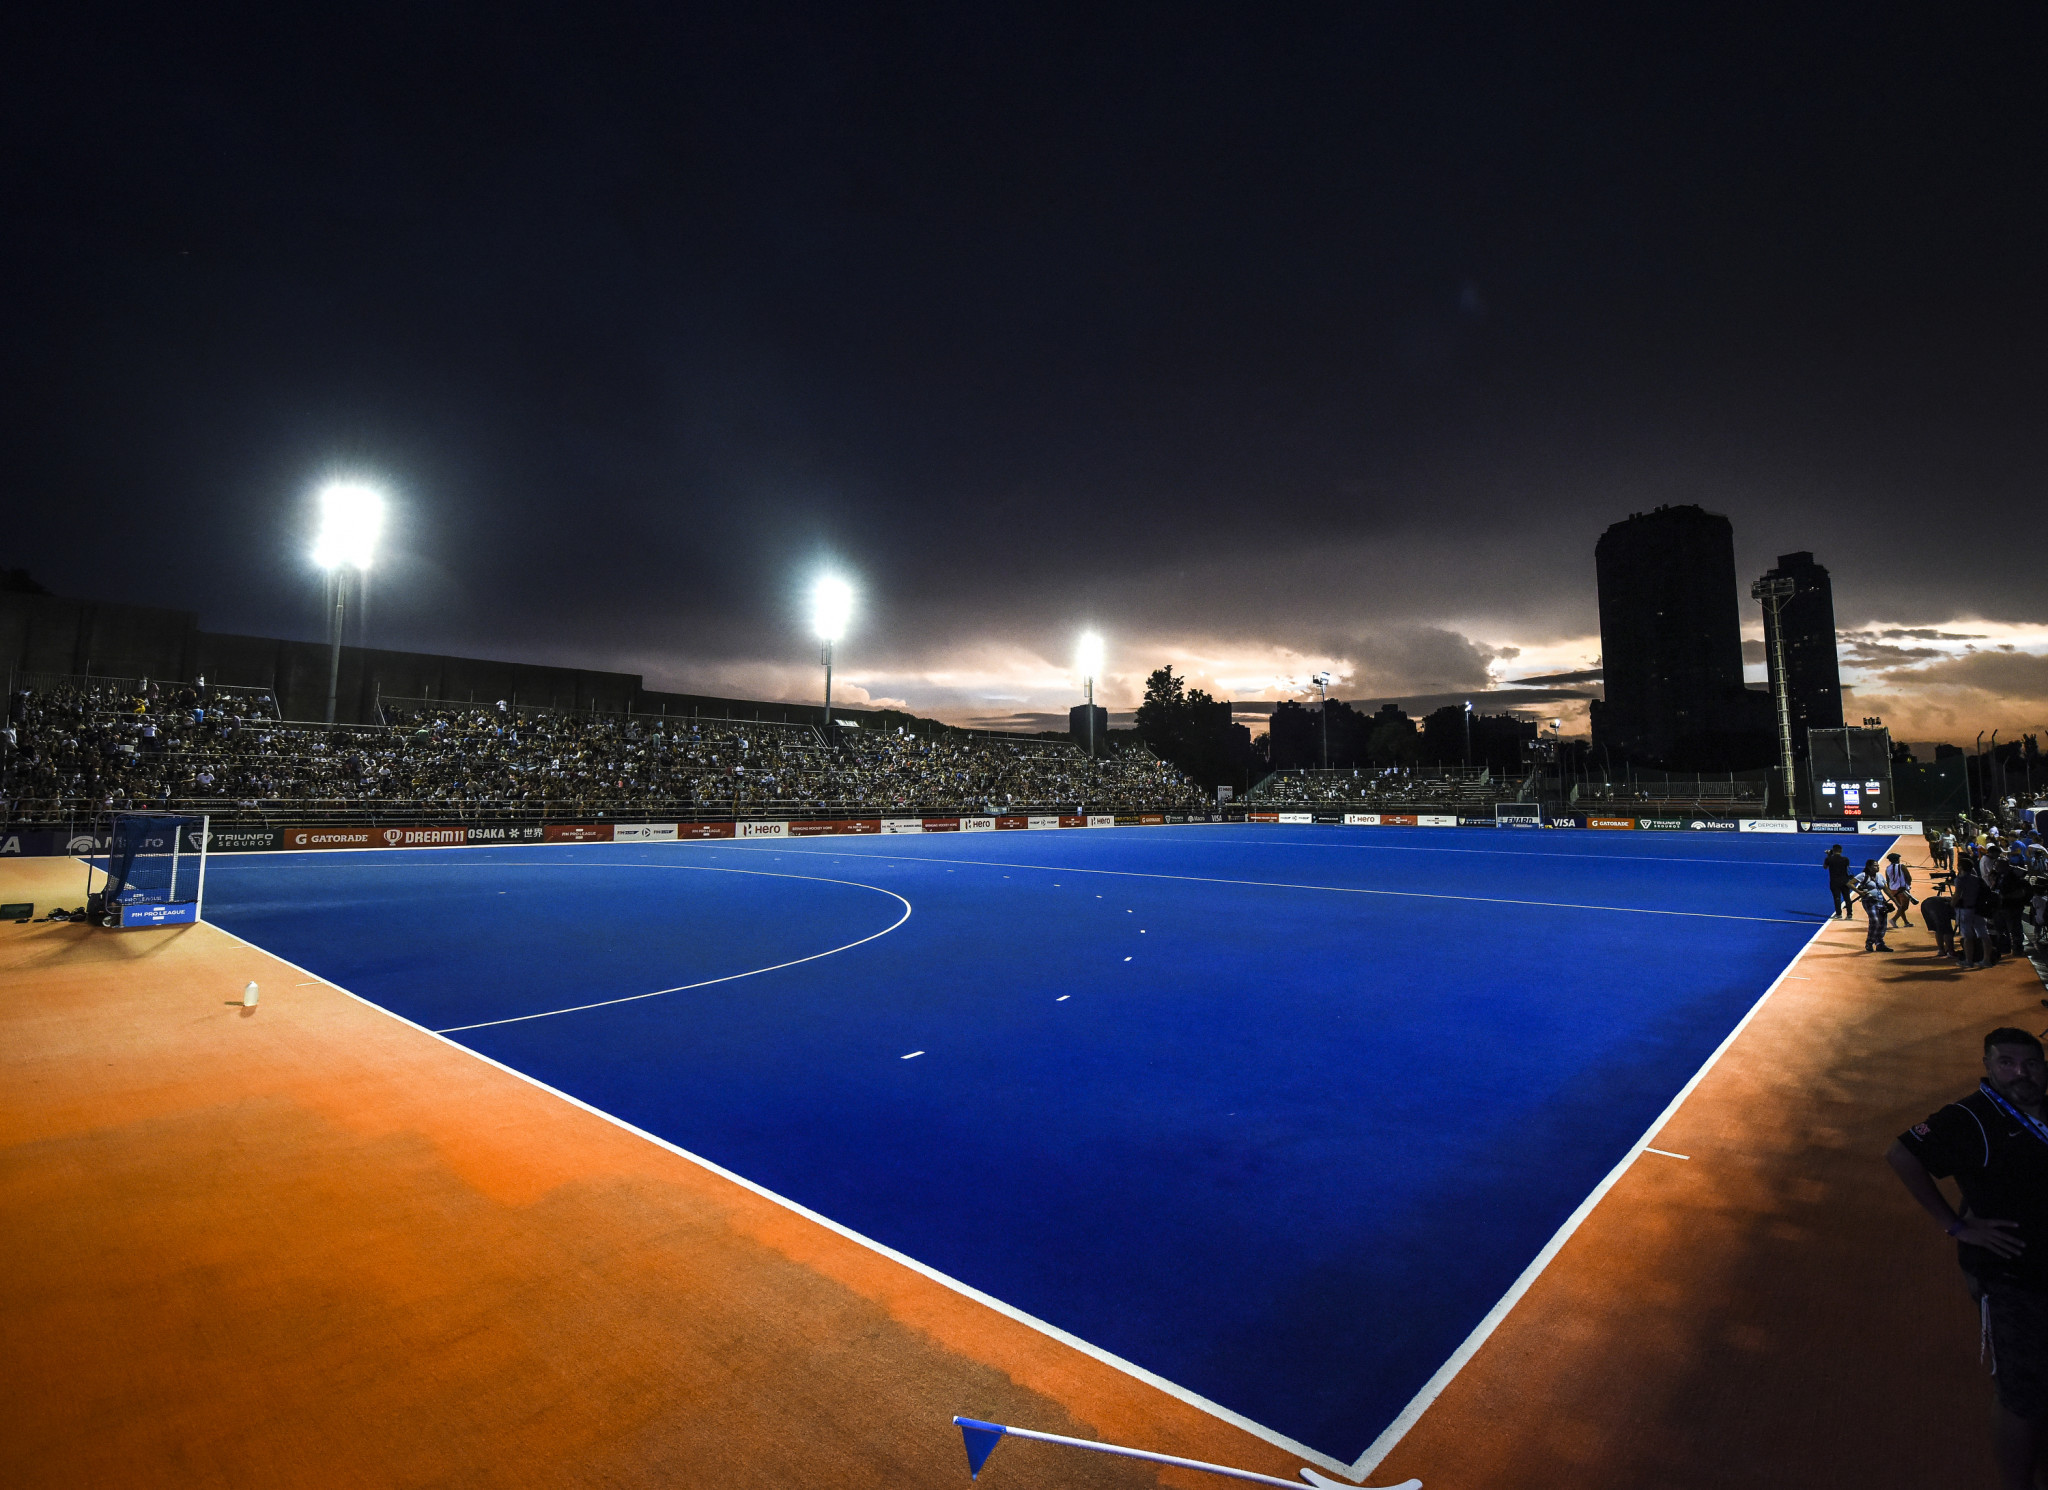 The National Centre of High Performance Athletics in Buenos Aires is set to host FIH Pro League matches ©Getty Images